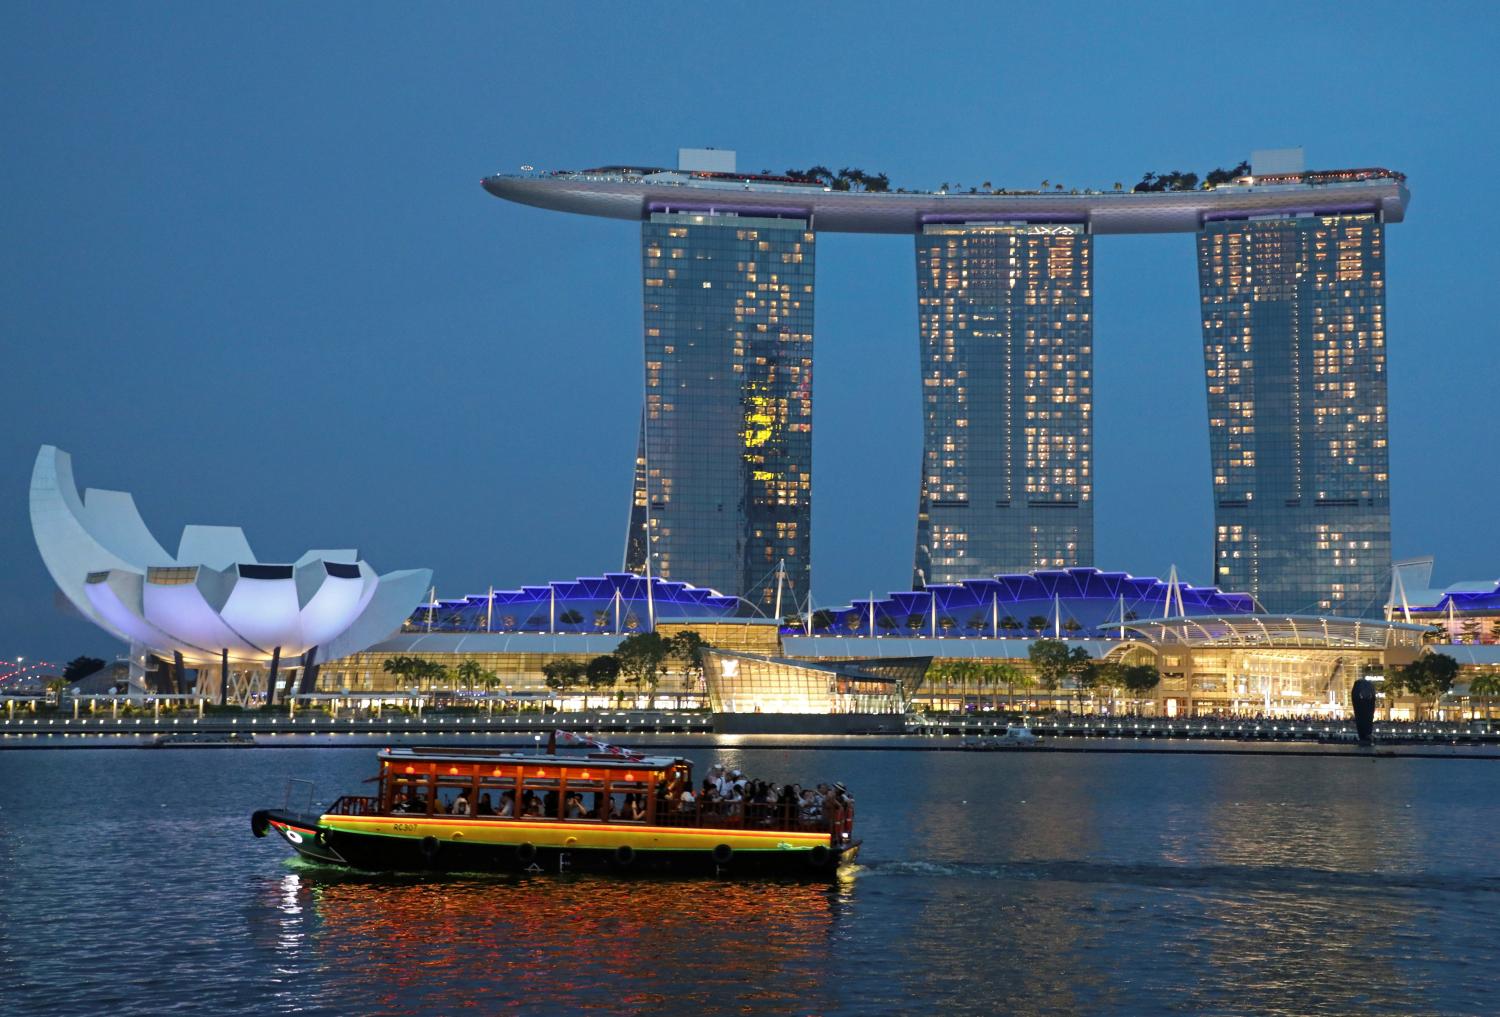 A tourist bum boat passes by the Marina Bay Sands hotel in Singapore July 3, 2019. Picture taken on July 3, 2019. REUTERS/Lim Huey Teng - RC157D90F2D0